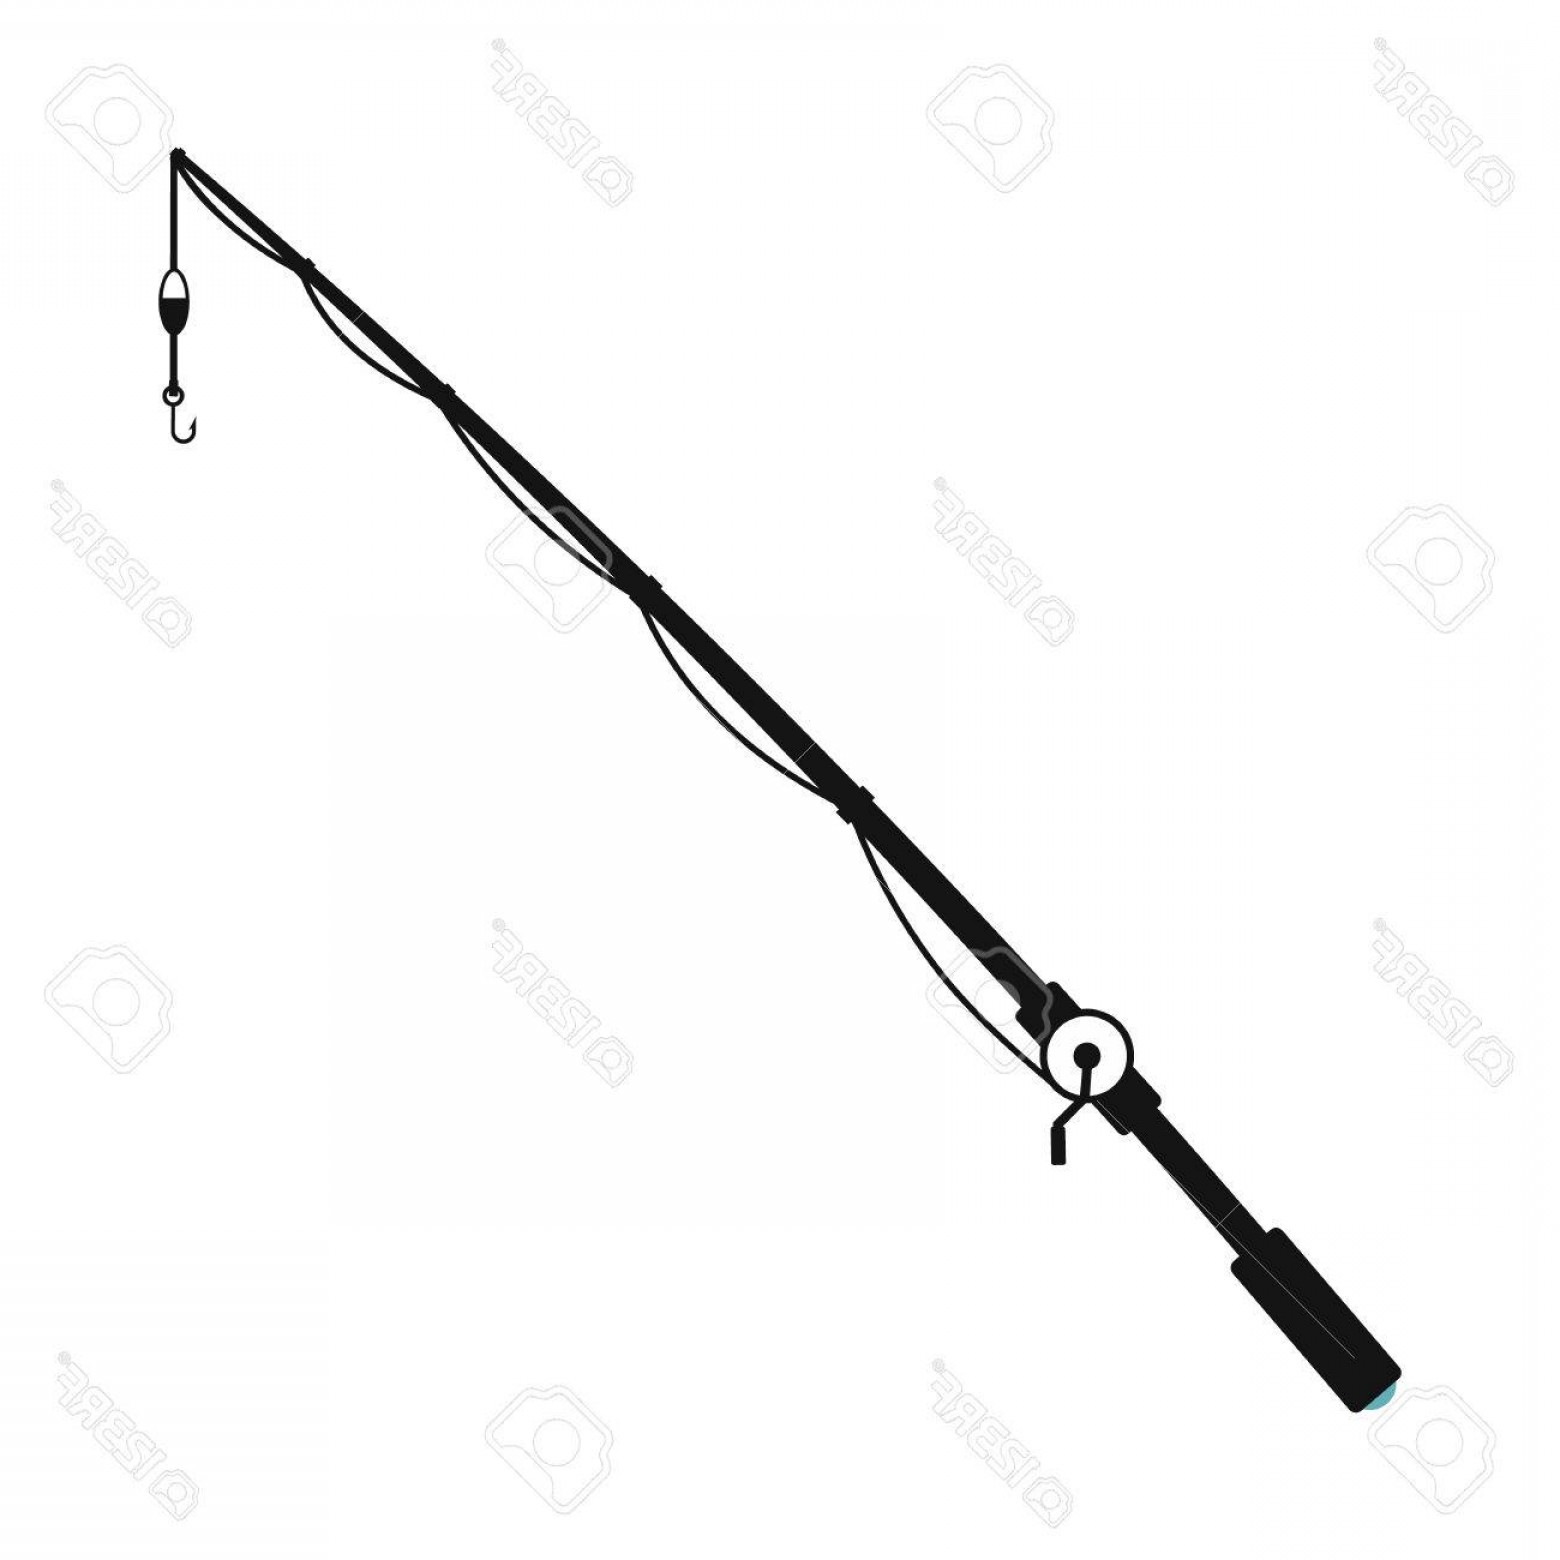 Download Fishing Pole Vector at Vectorified.com | Collection of Fishing Pole Vector free for personal use